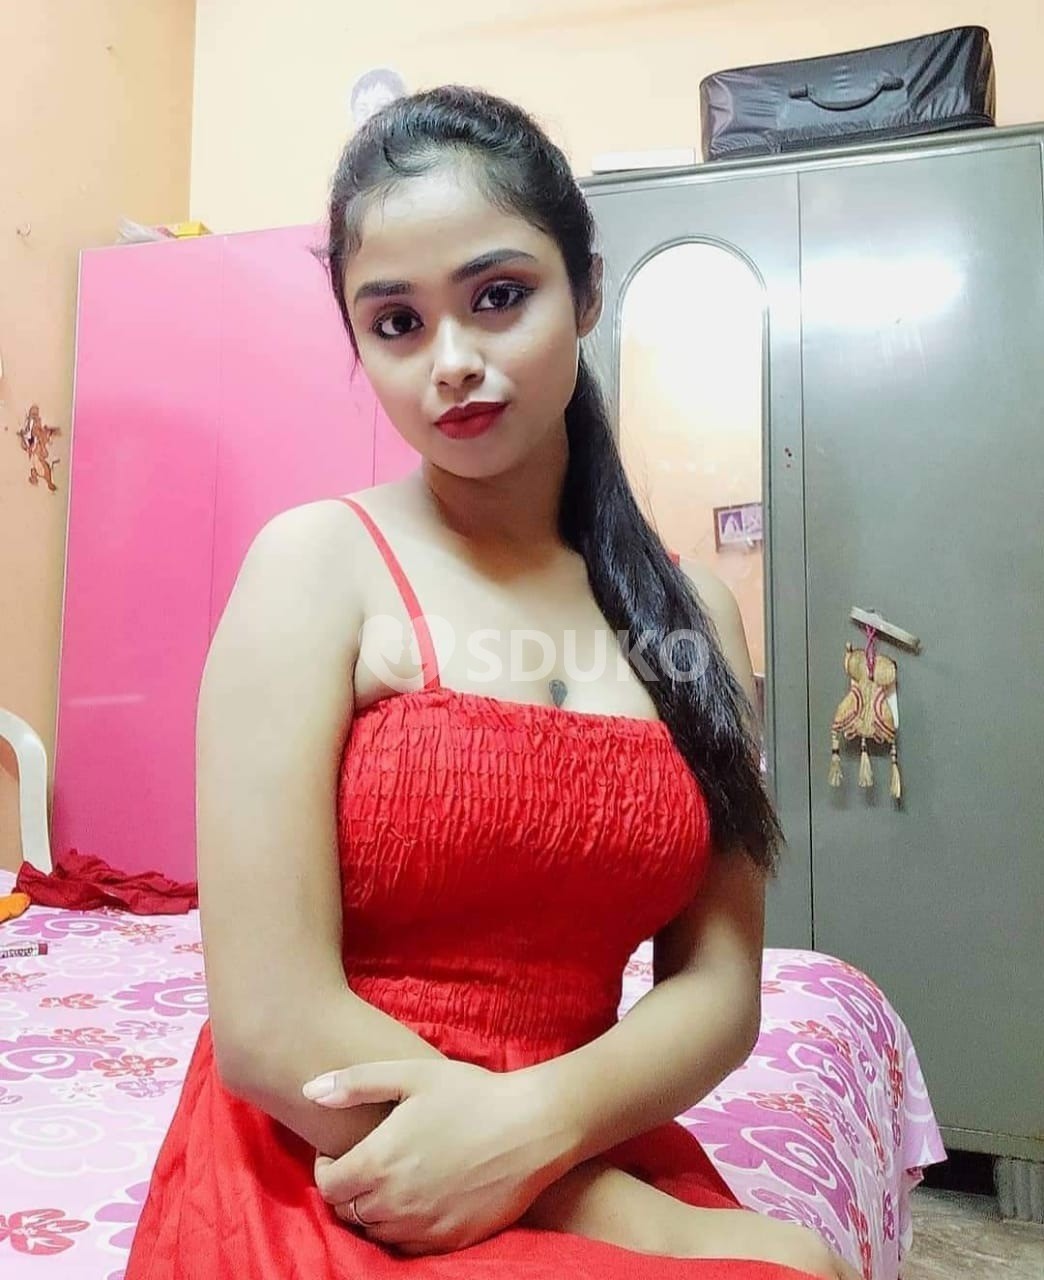 Kolkata 27/7 ..service providing ⭐unlimited sort 100% interested VIP call girls full satisfied all type service genuin